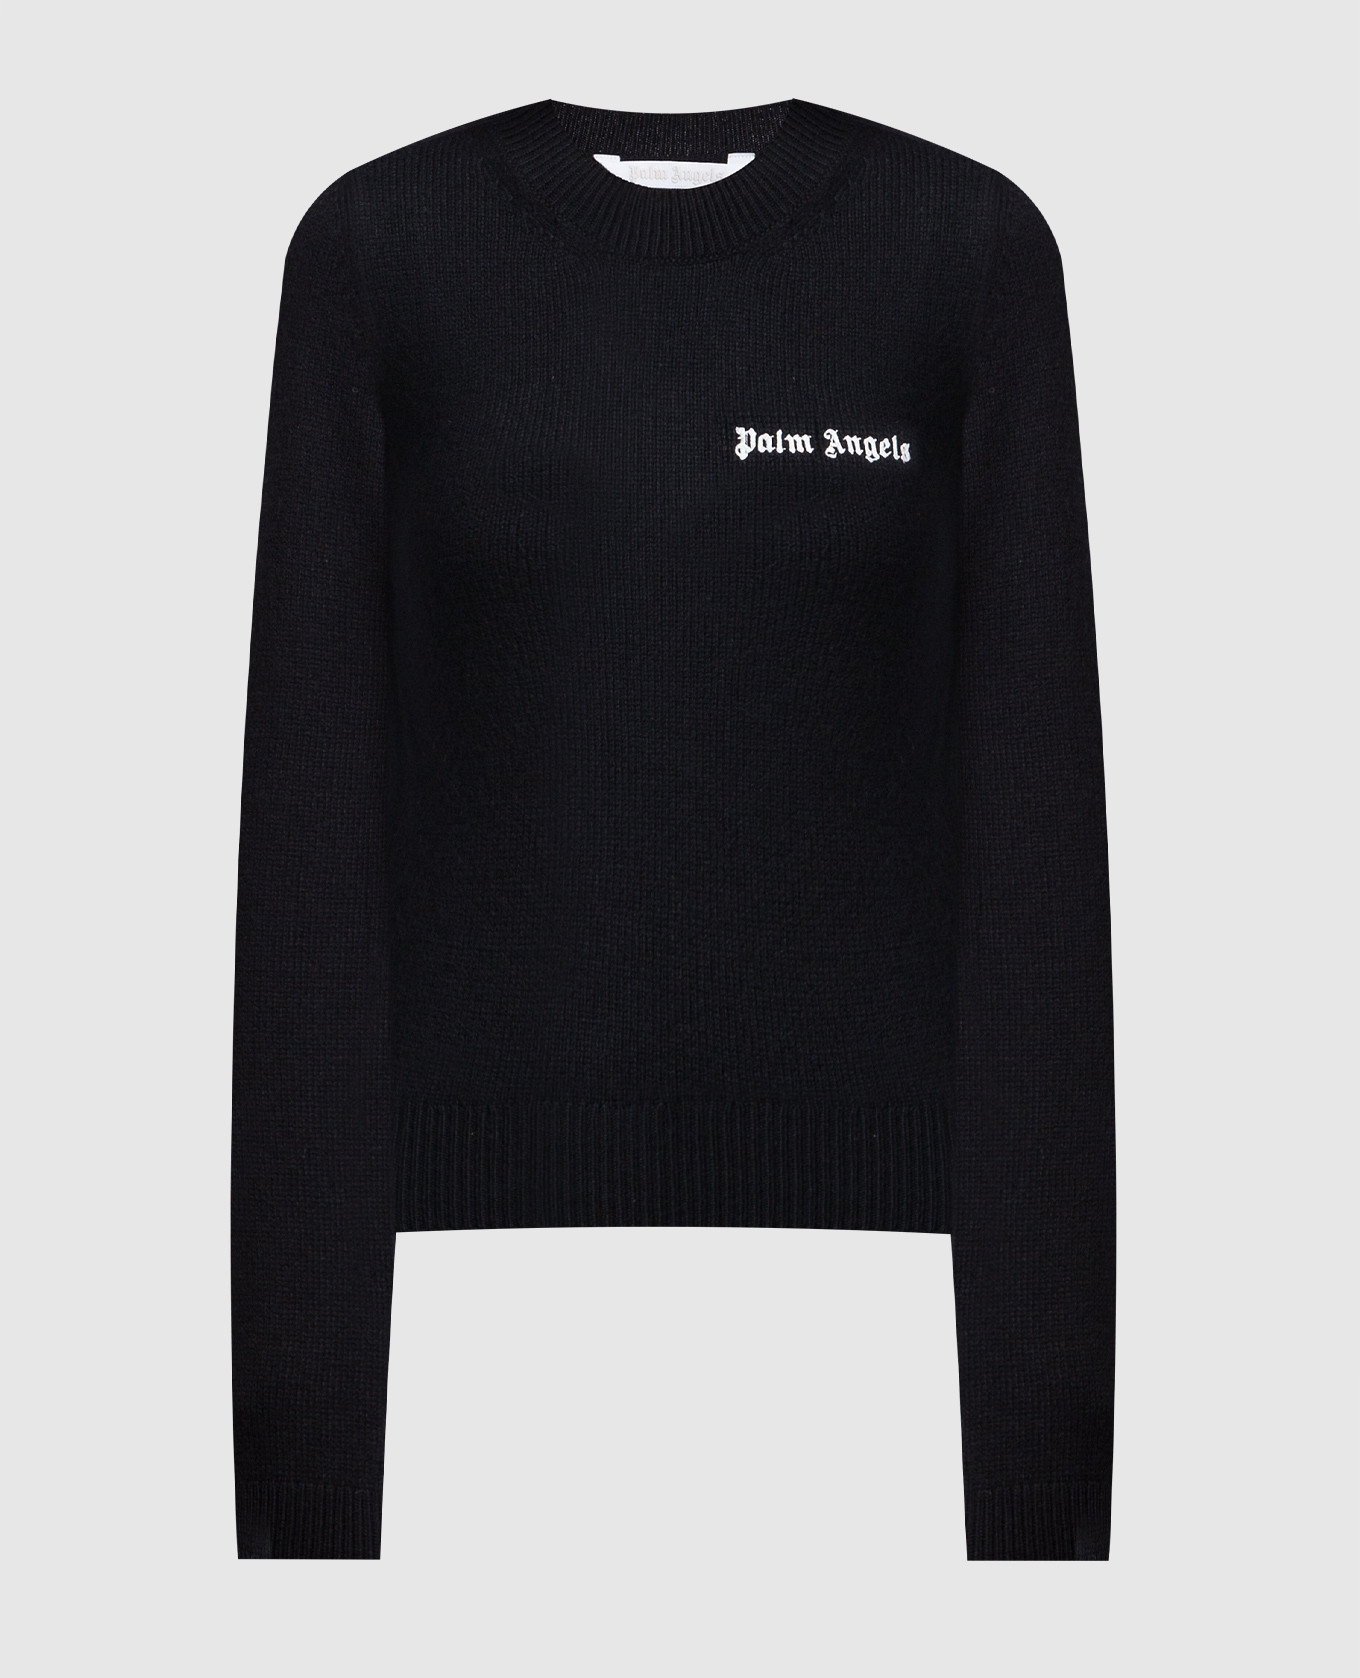 Black sweater with logo embroidery